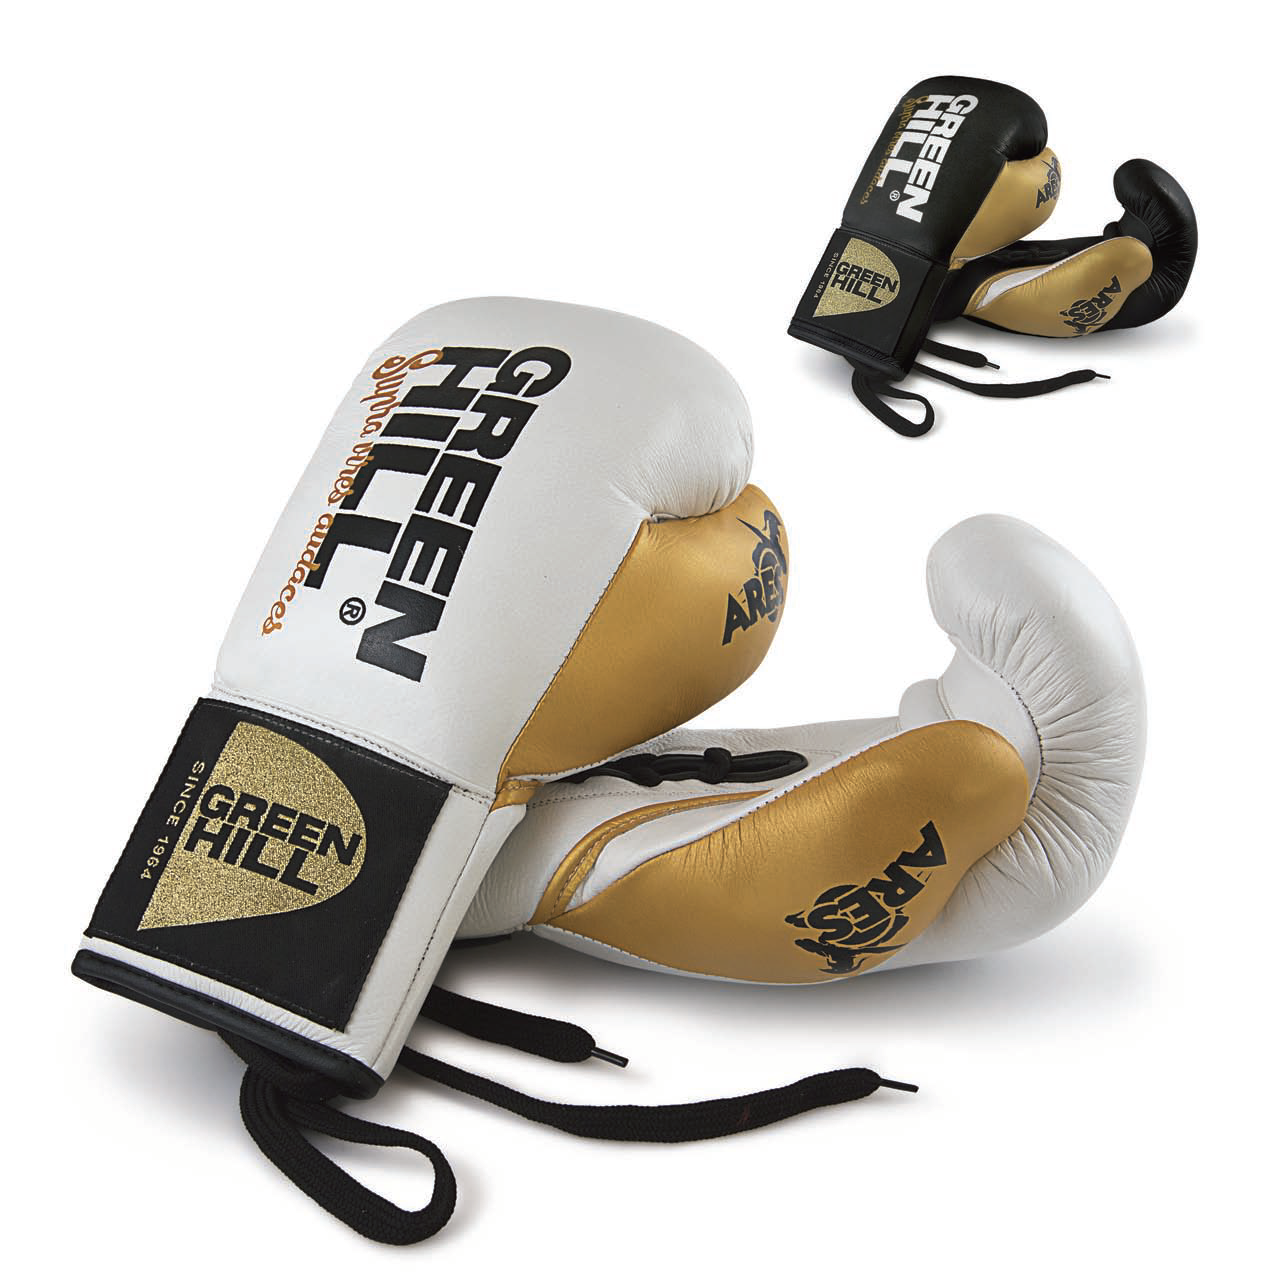 Boxing Gloves “ARES”